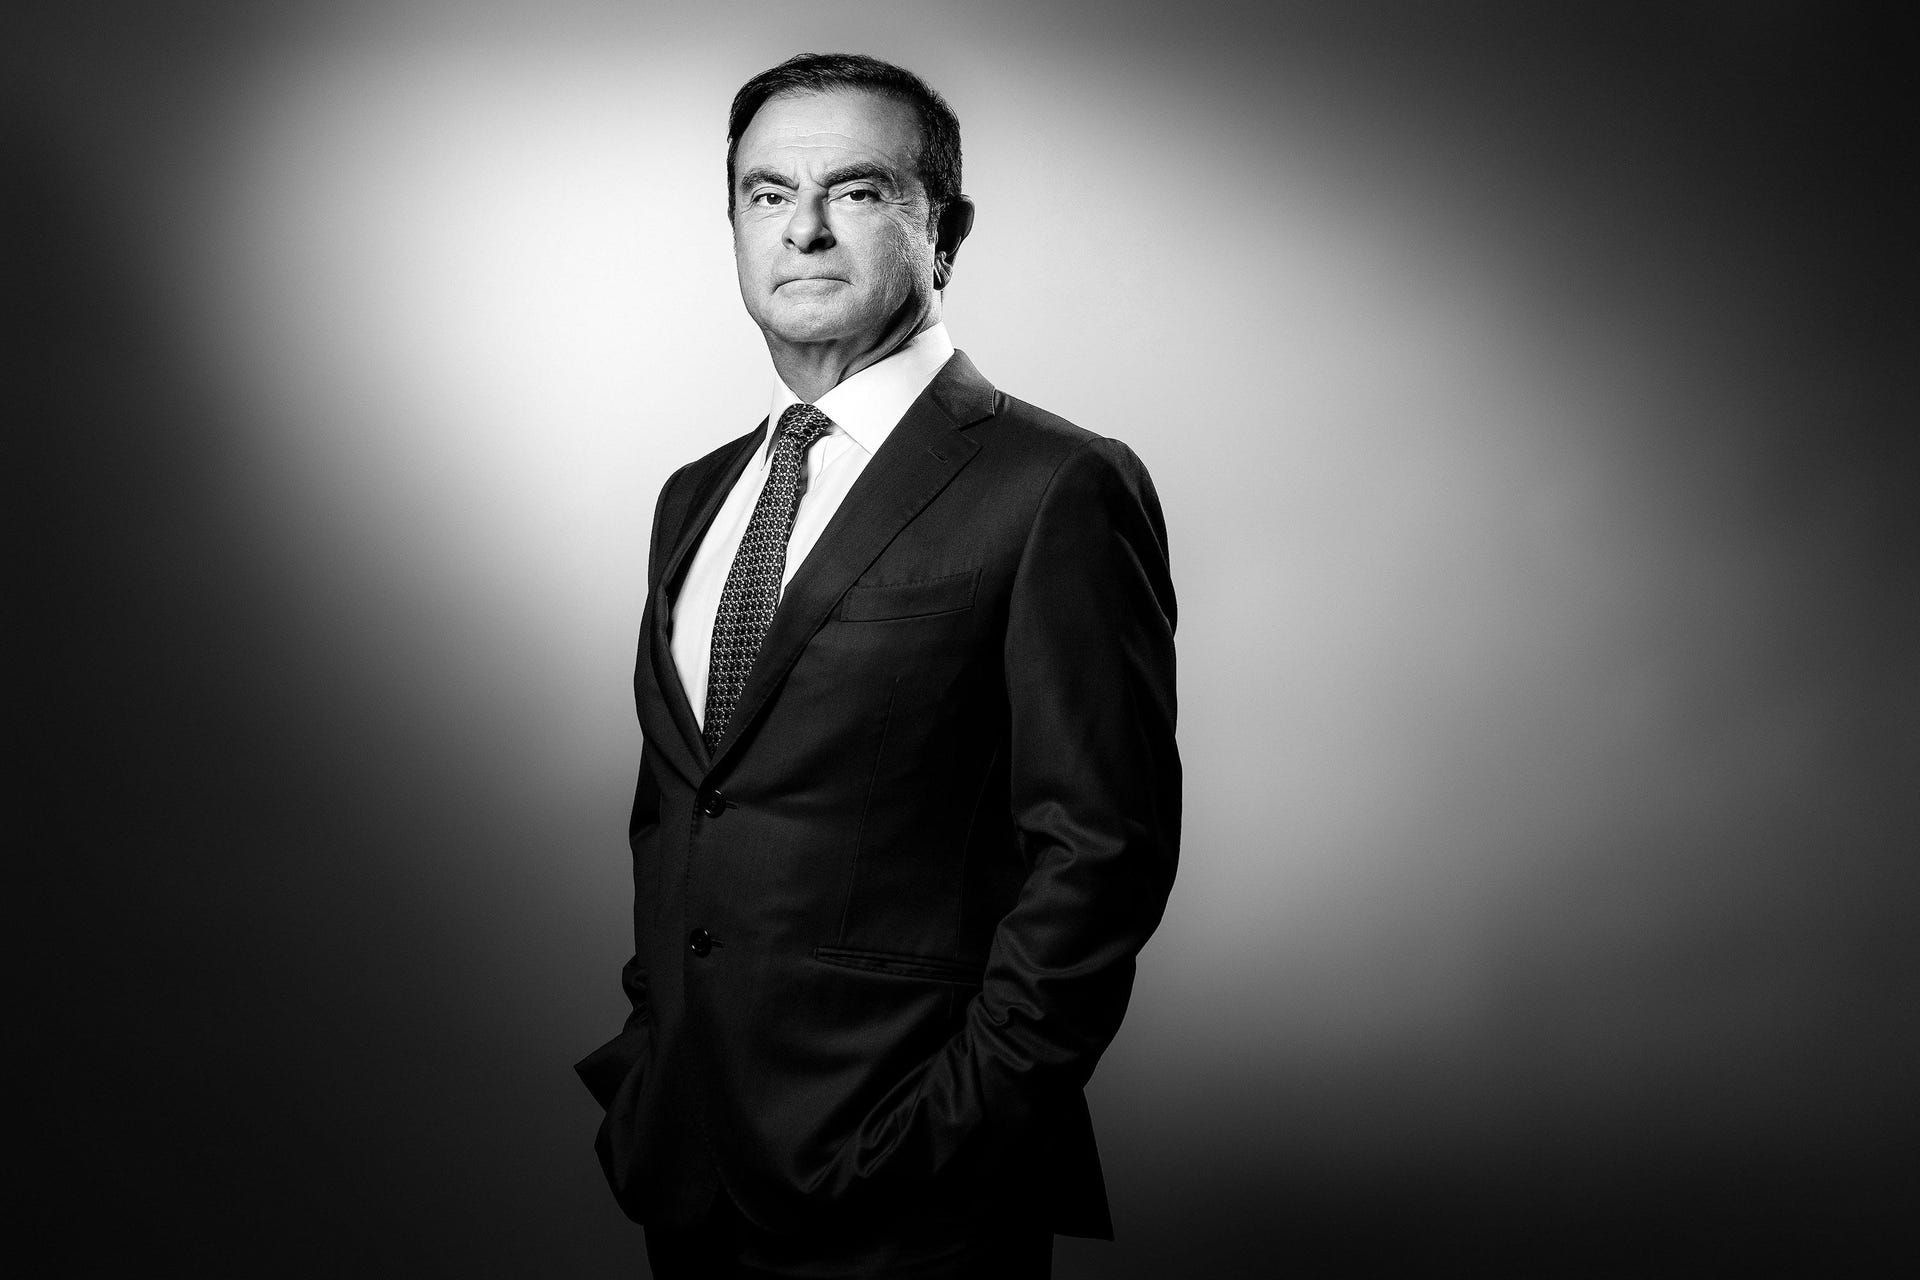 FRANCE-PORTRAIT-GHOSN-RENAULT-BLACK AND WHITE